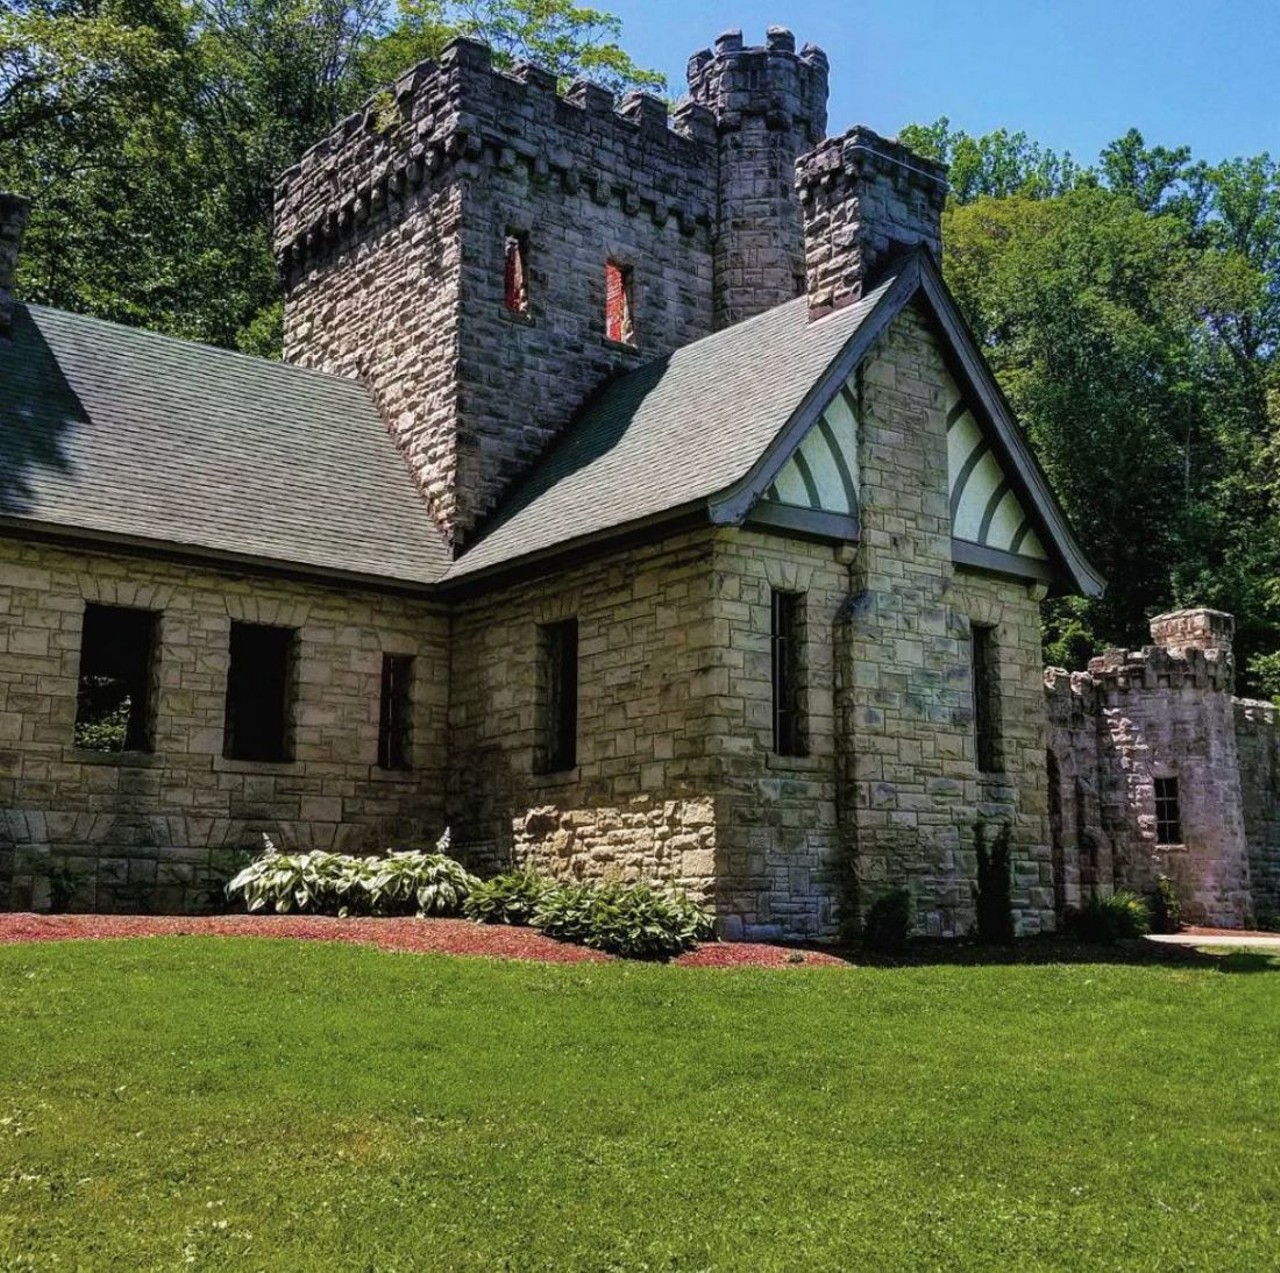  North Chagrin Reservation
401 Buttermilk Falls Pkwy., 440-473-3370
This reservation is home to Squires Castle, a medieval style building with a large lawn out front. Sit like royalty on top of your picnic blanket and admire the architecture, or take a hike around the MetroPark. 
Photo via xxbrian007xx/Instagram